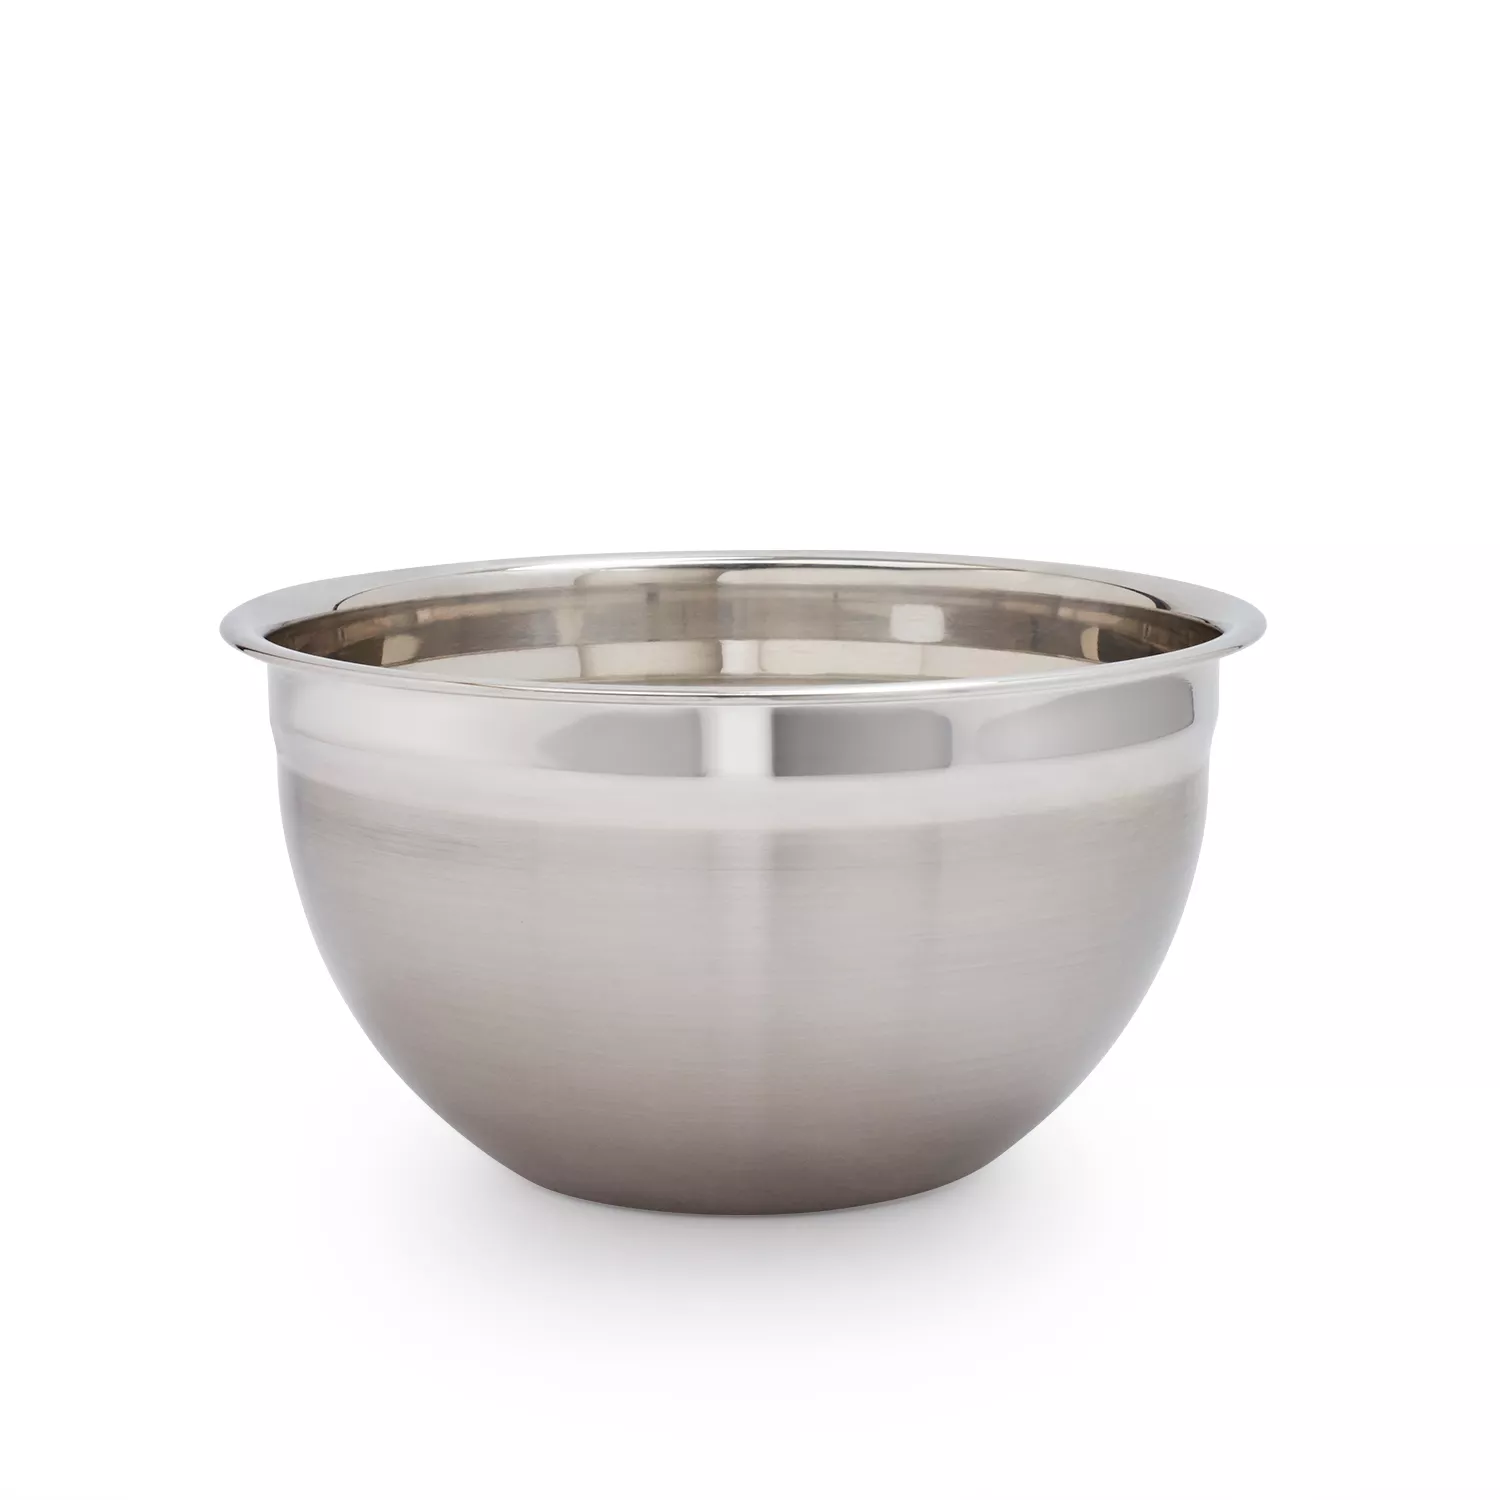 Stainless steel mixing bowl 32 oz